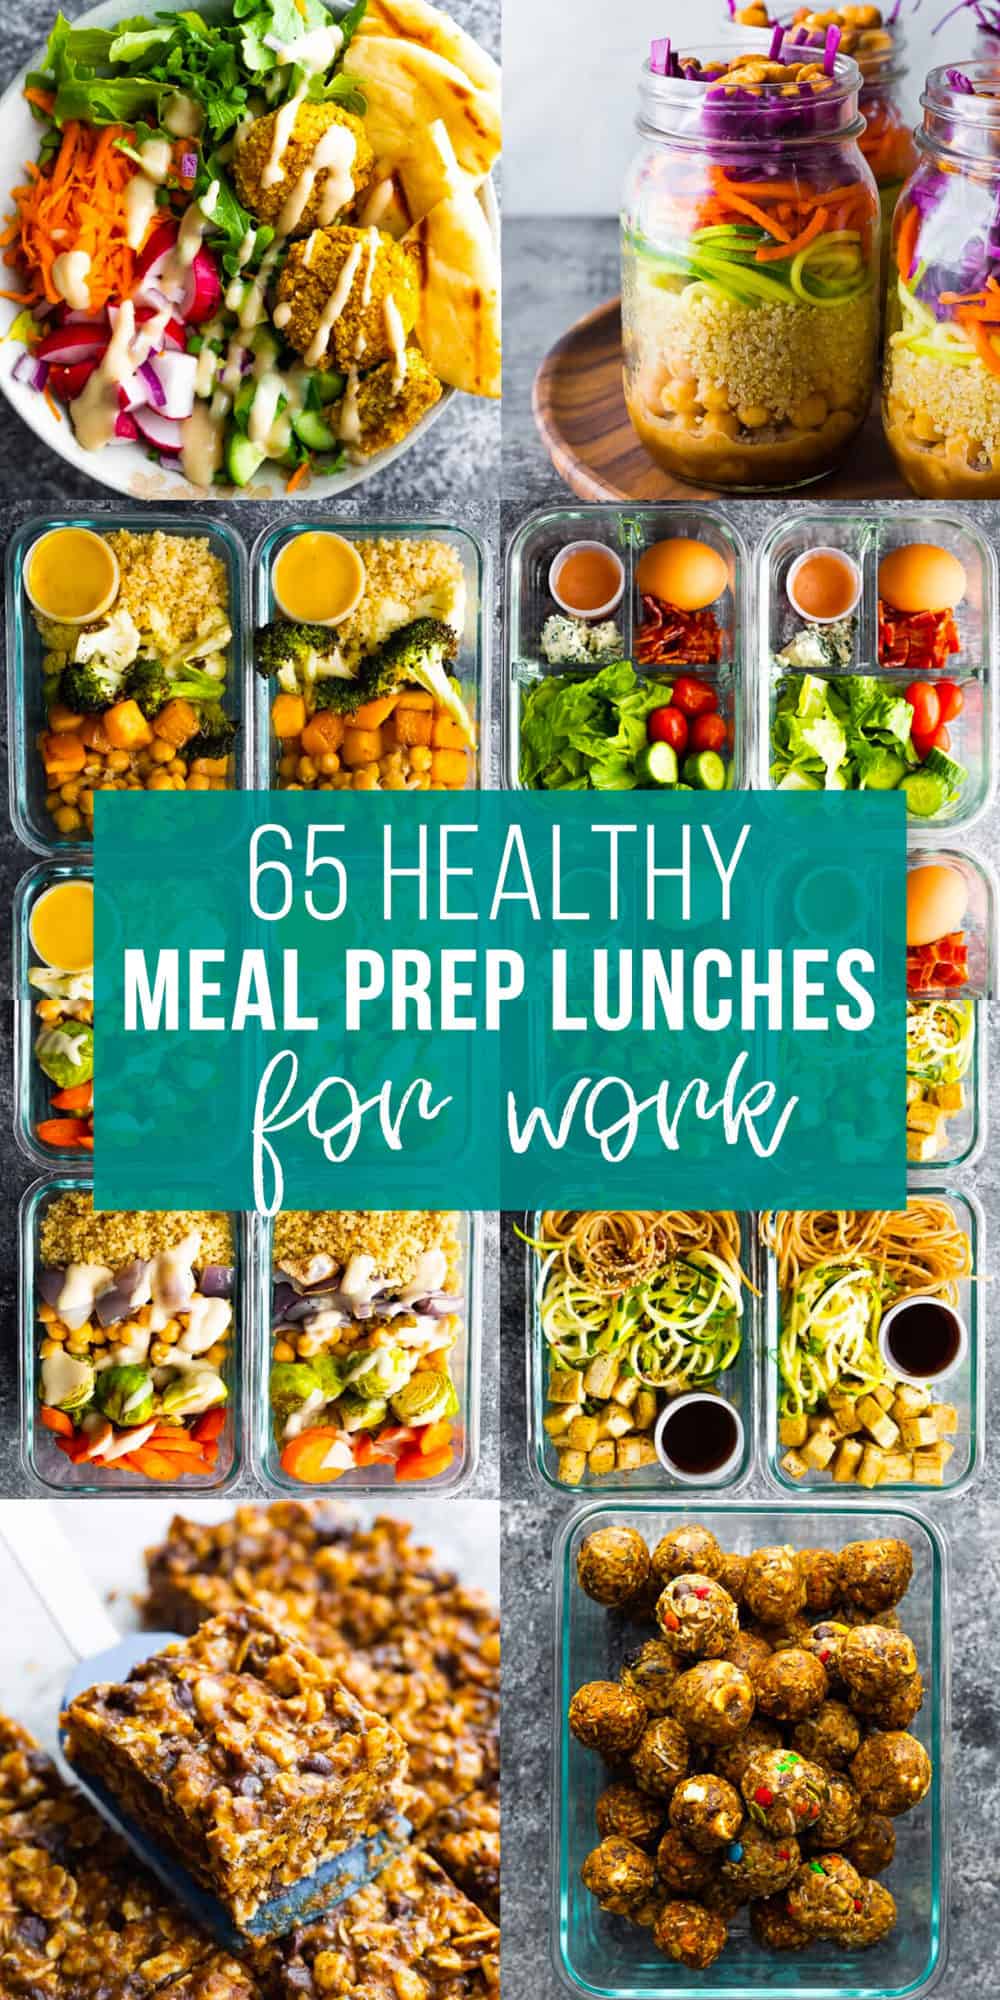 65 healthy meal prep lunches composite image with bento box lunches, salad jars, falafel salad, energy bites, and no bake snack bars